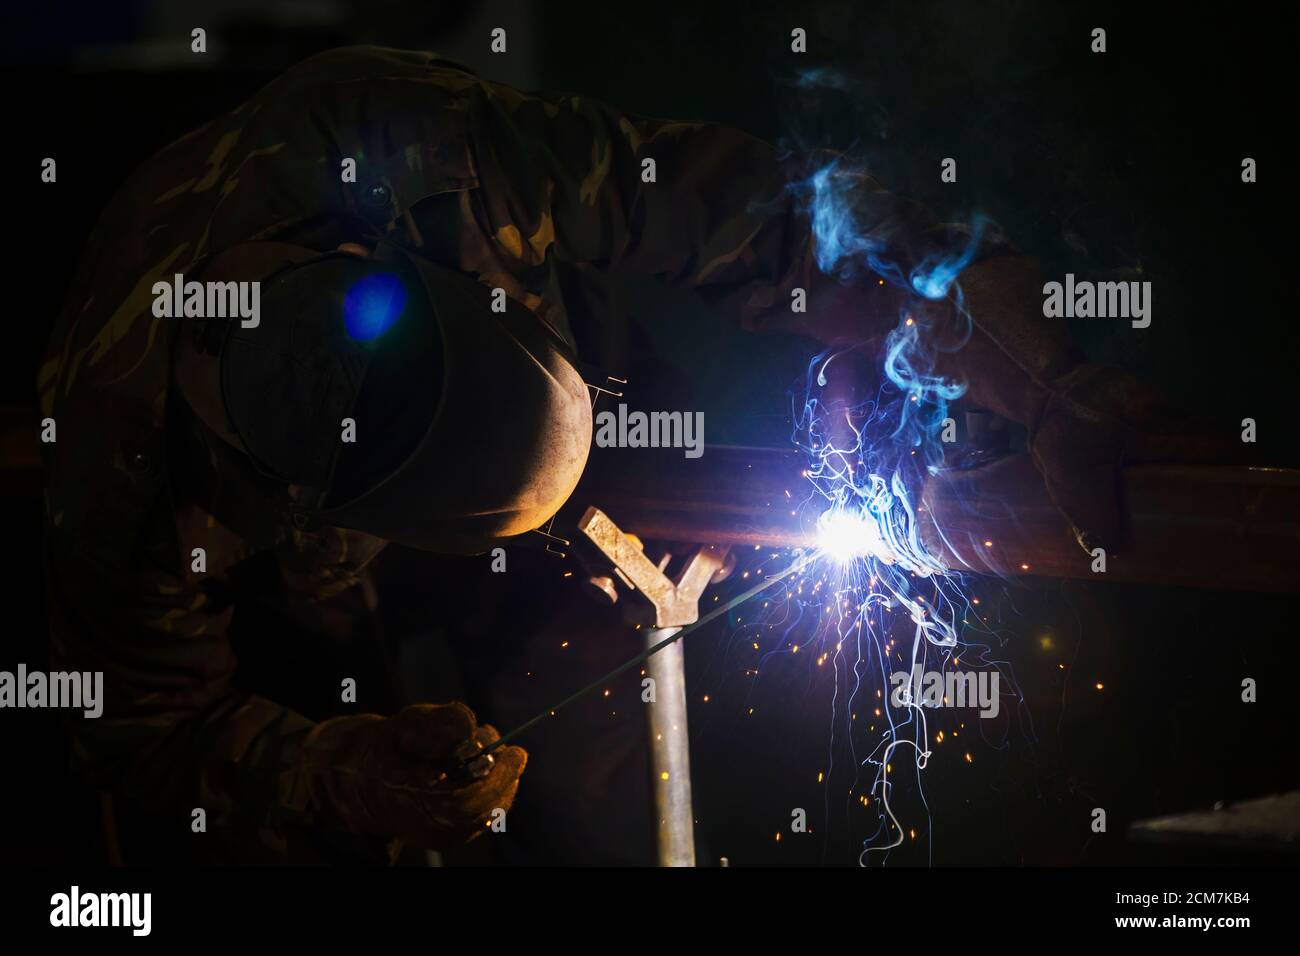 Welder at work. Man in a protective mask. The welder makes seams on the metal. Sparks and smoke when welding. Stock Photo